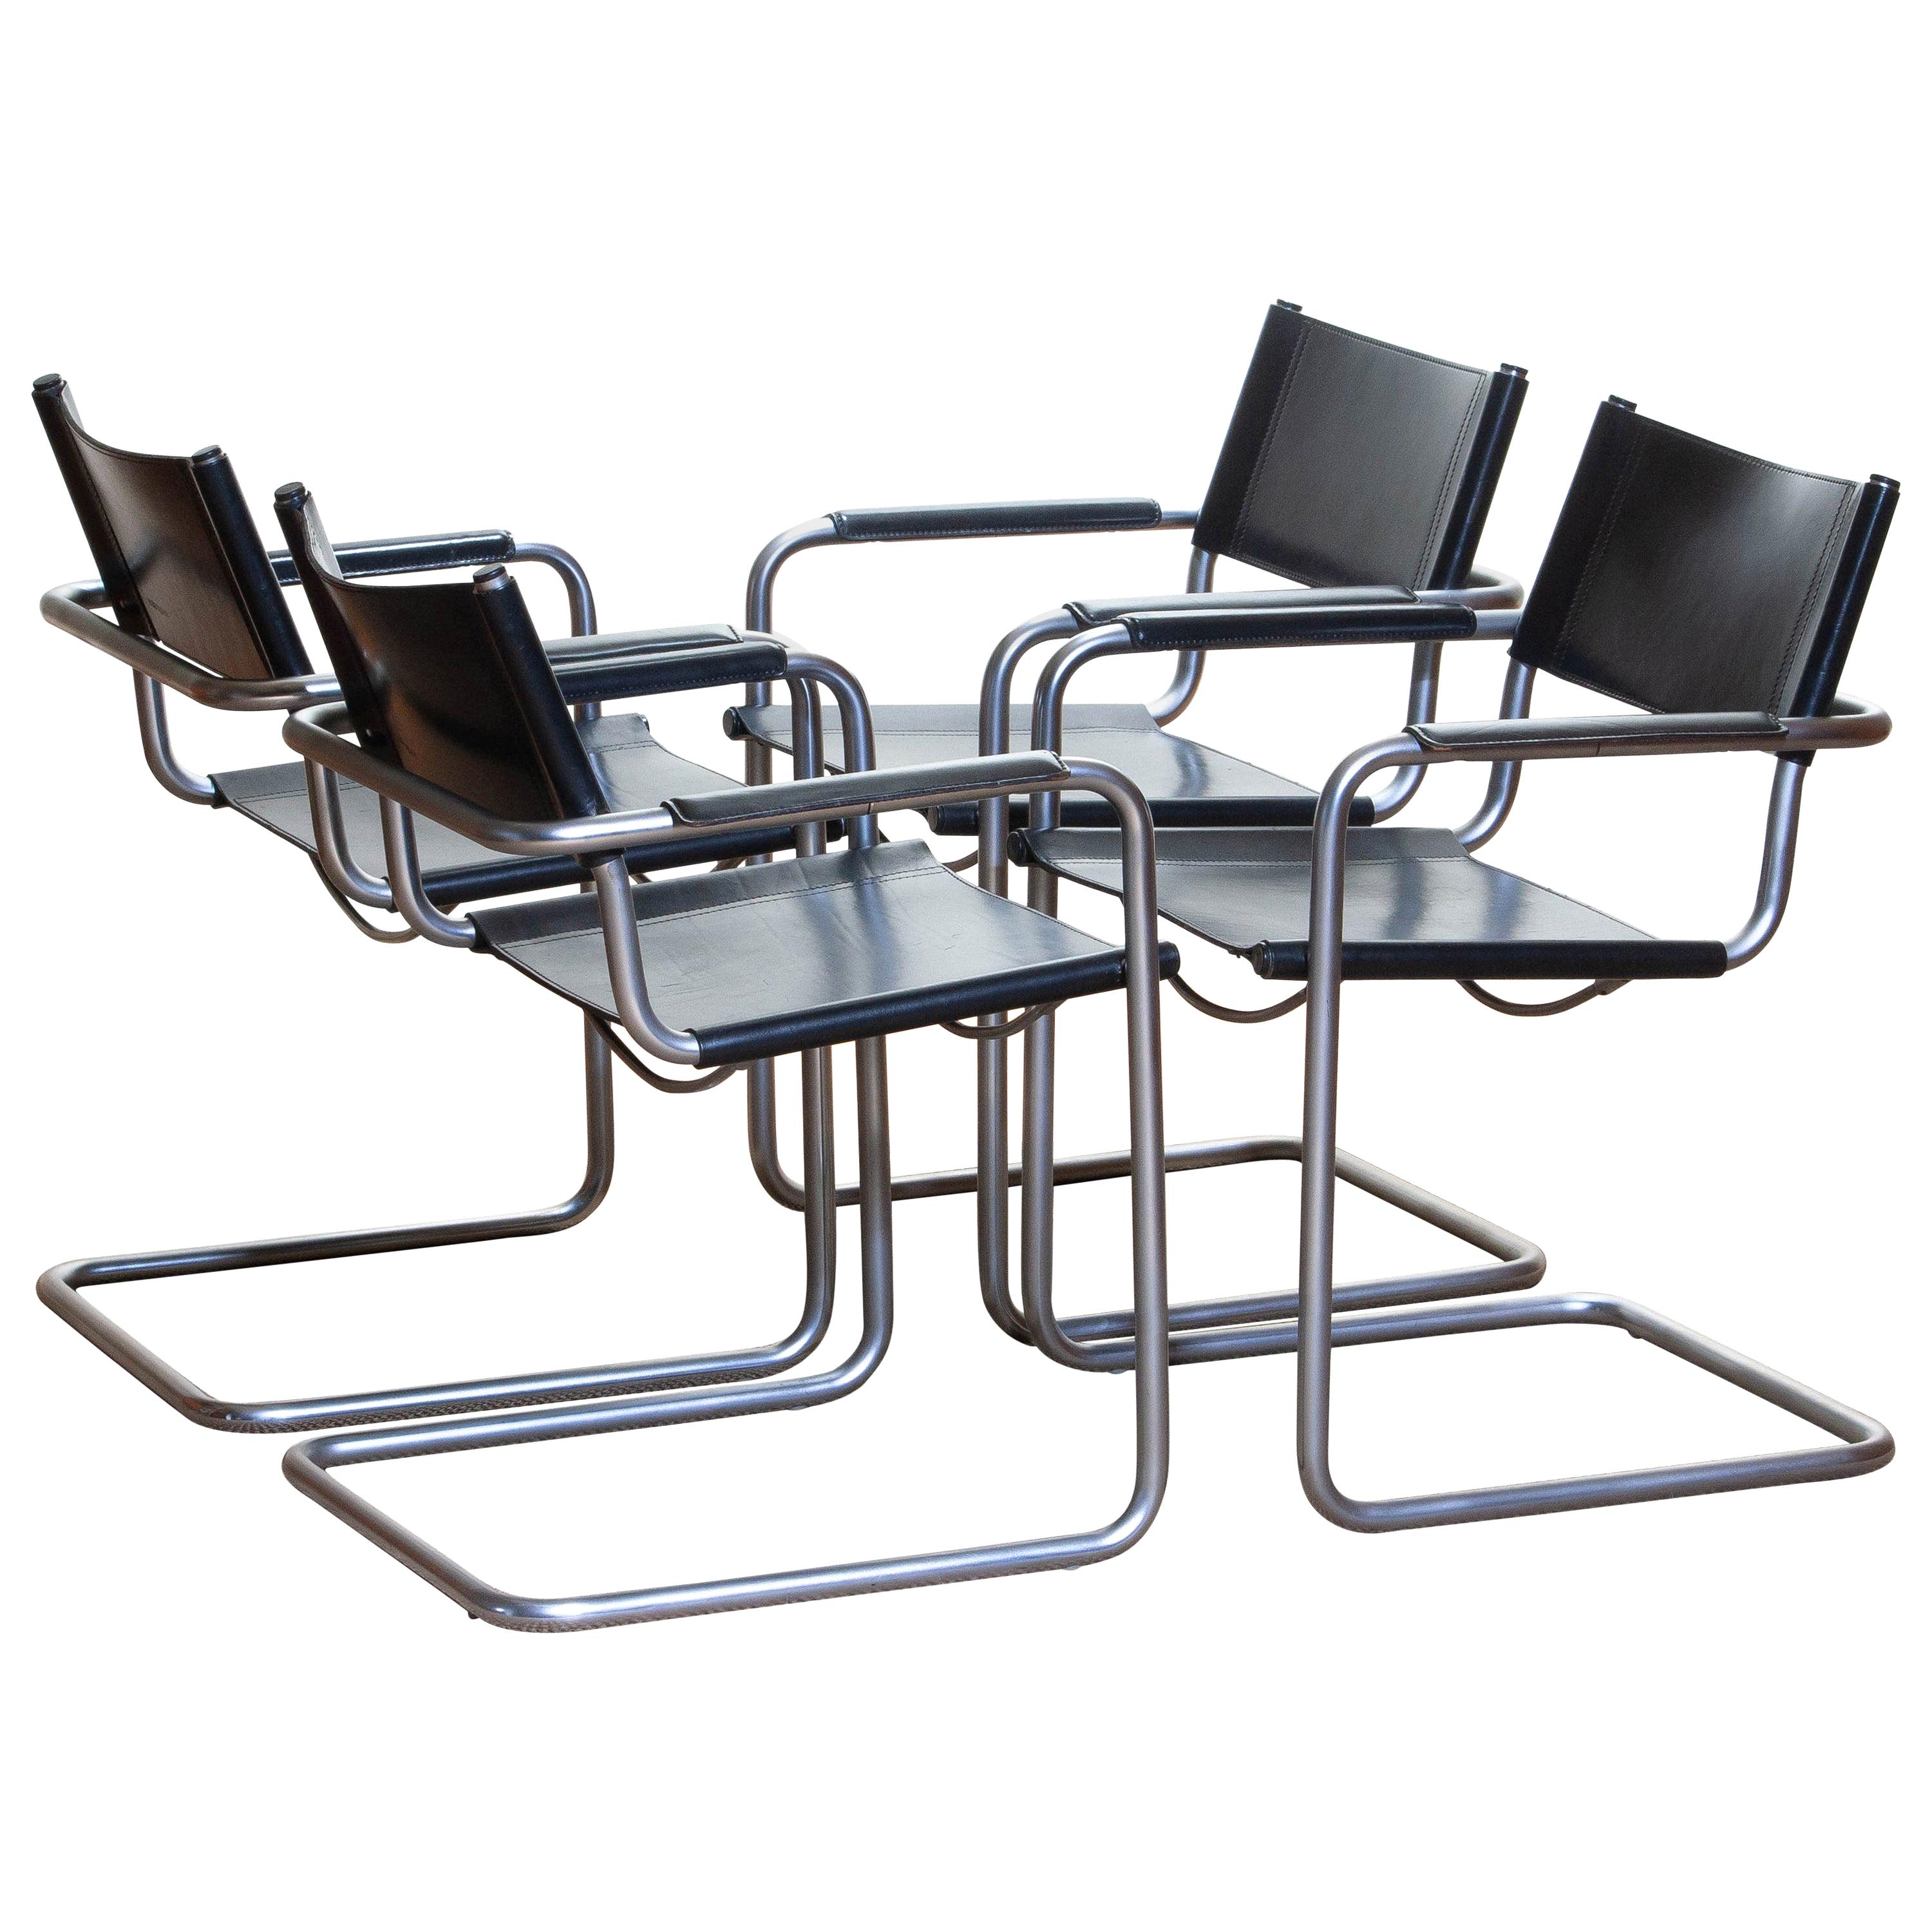 1970s, Set of Four MG5 Black Leather Dining or Office Chairs by Matteo Grassi